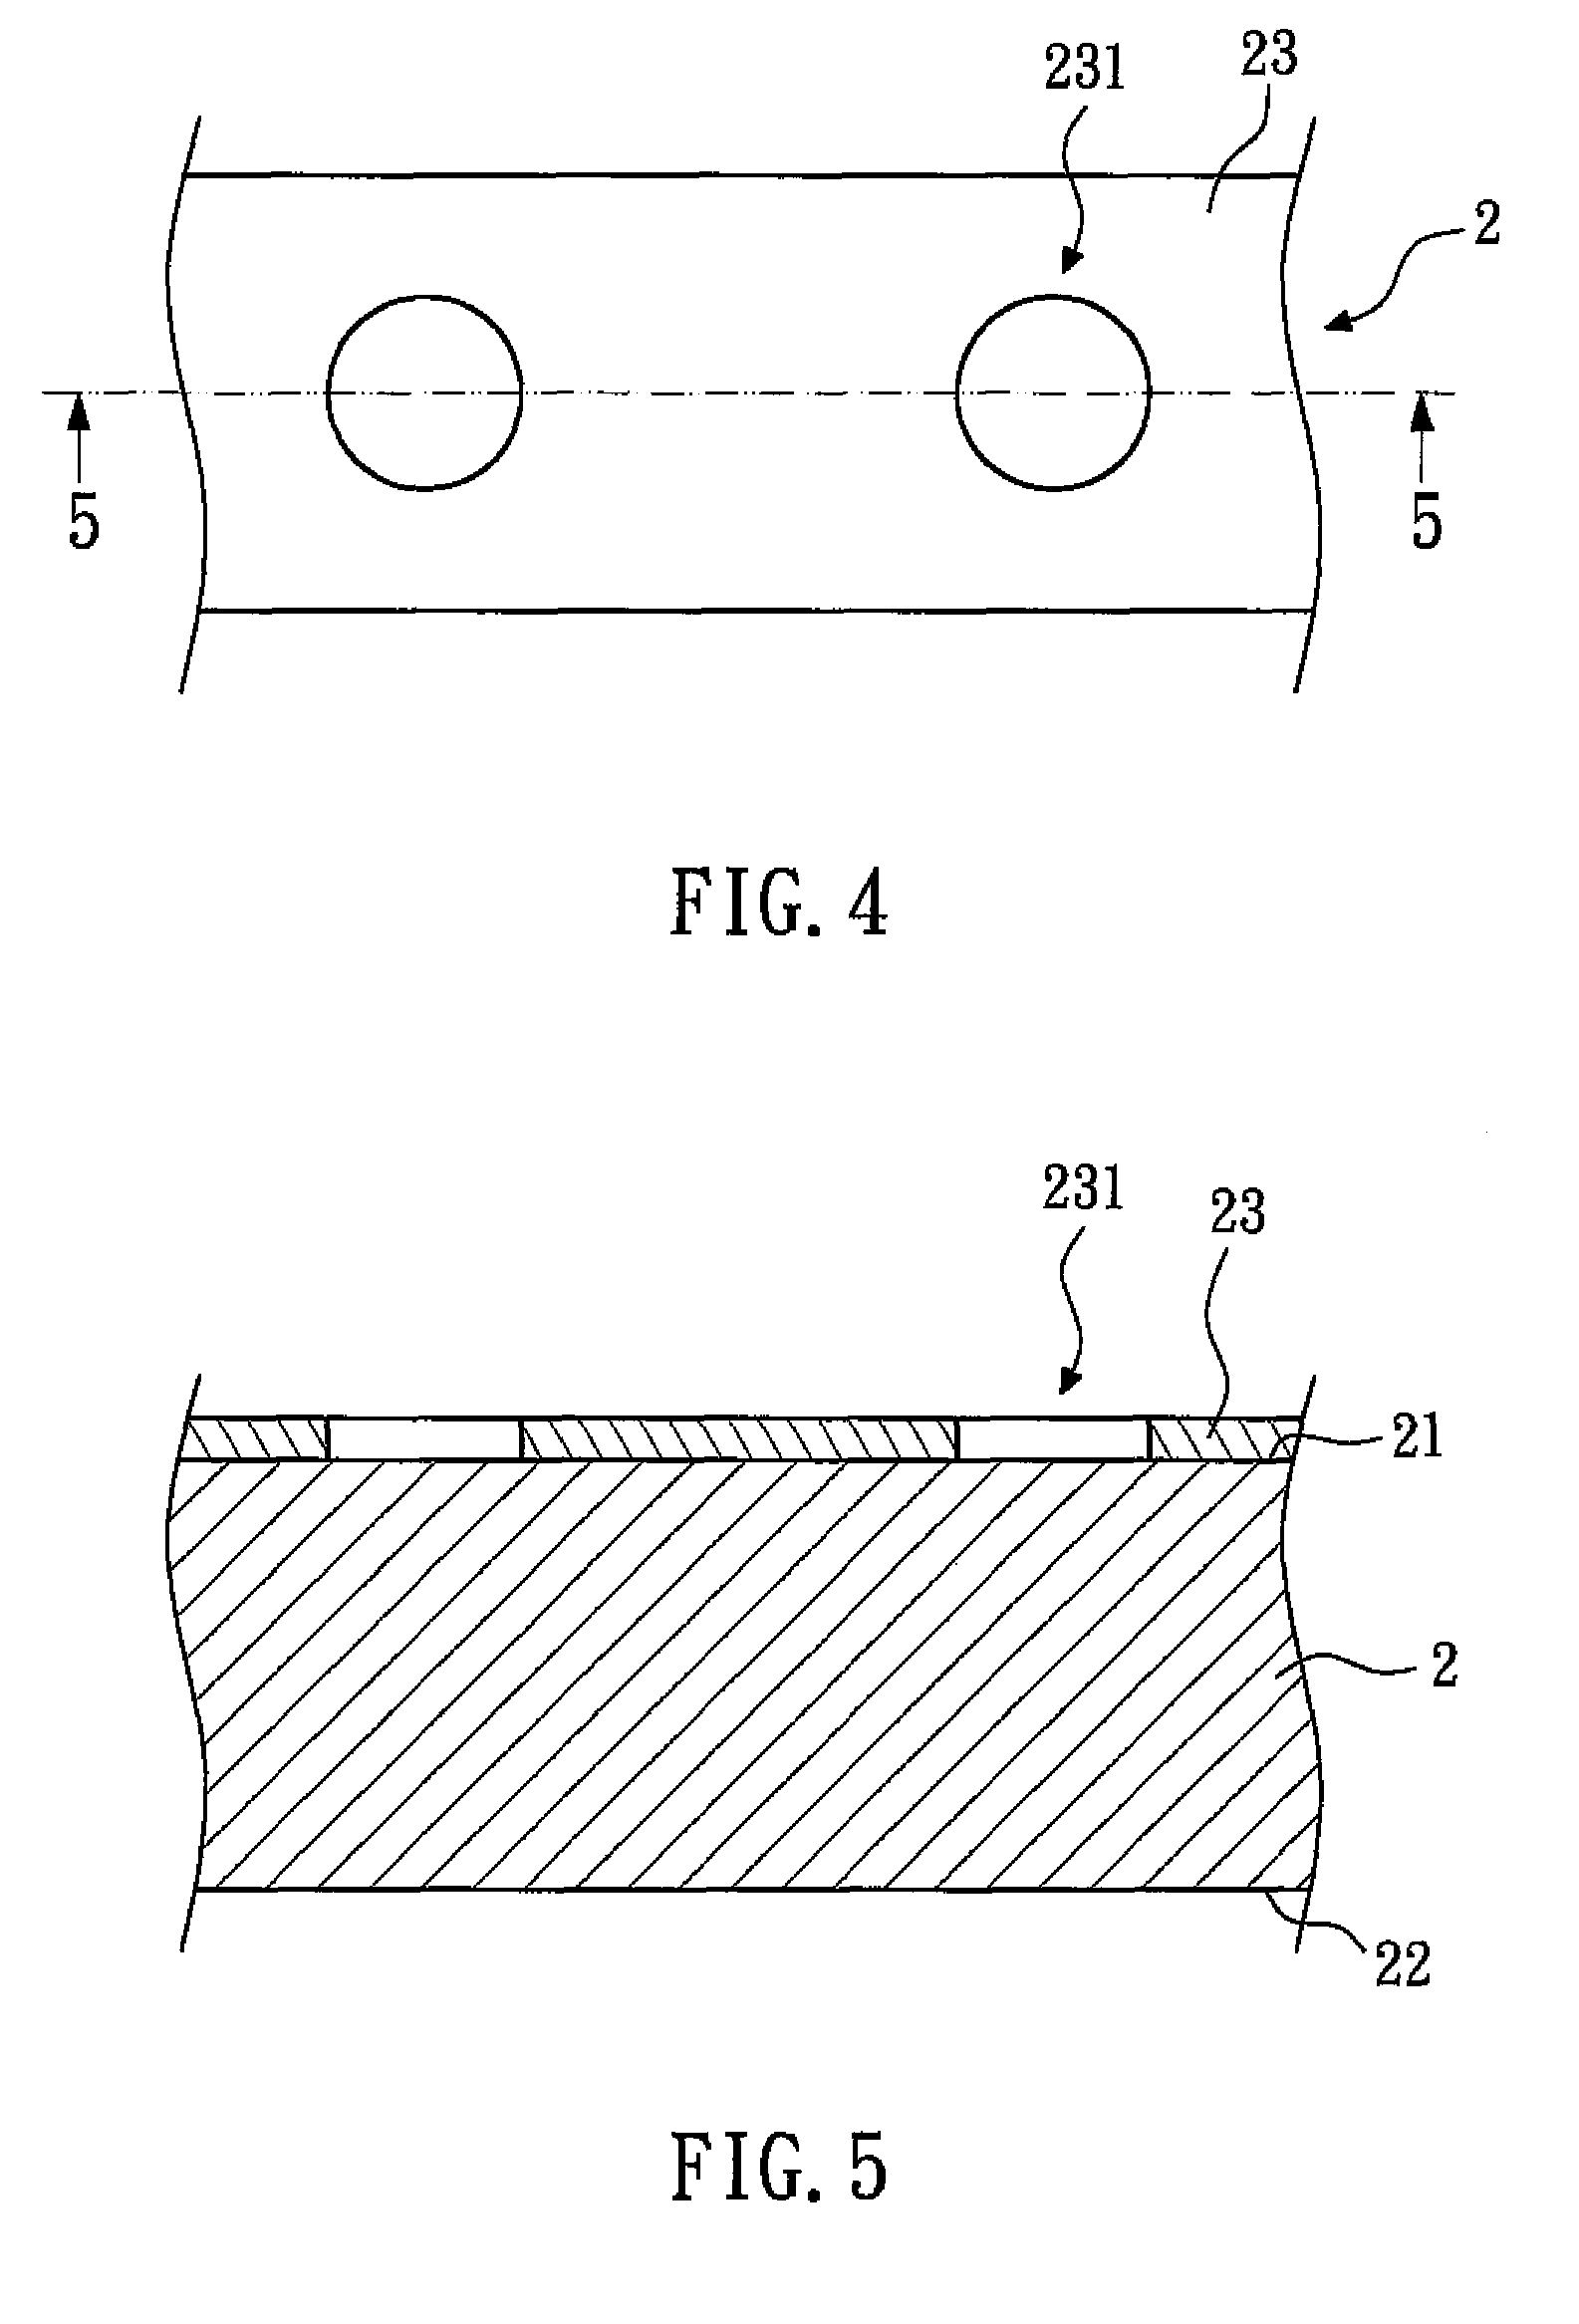 Method for forming vias in a substrate